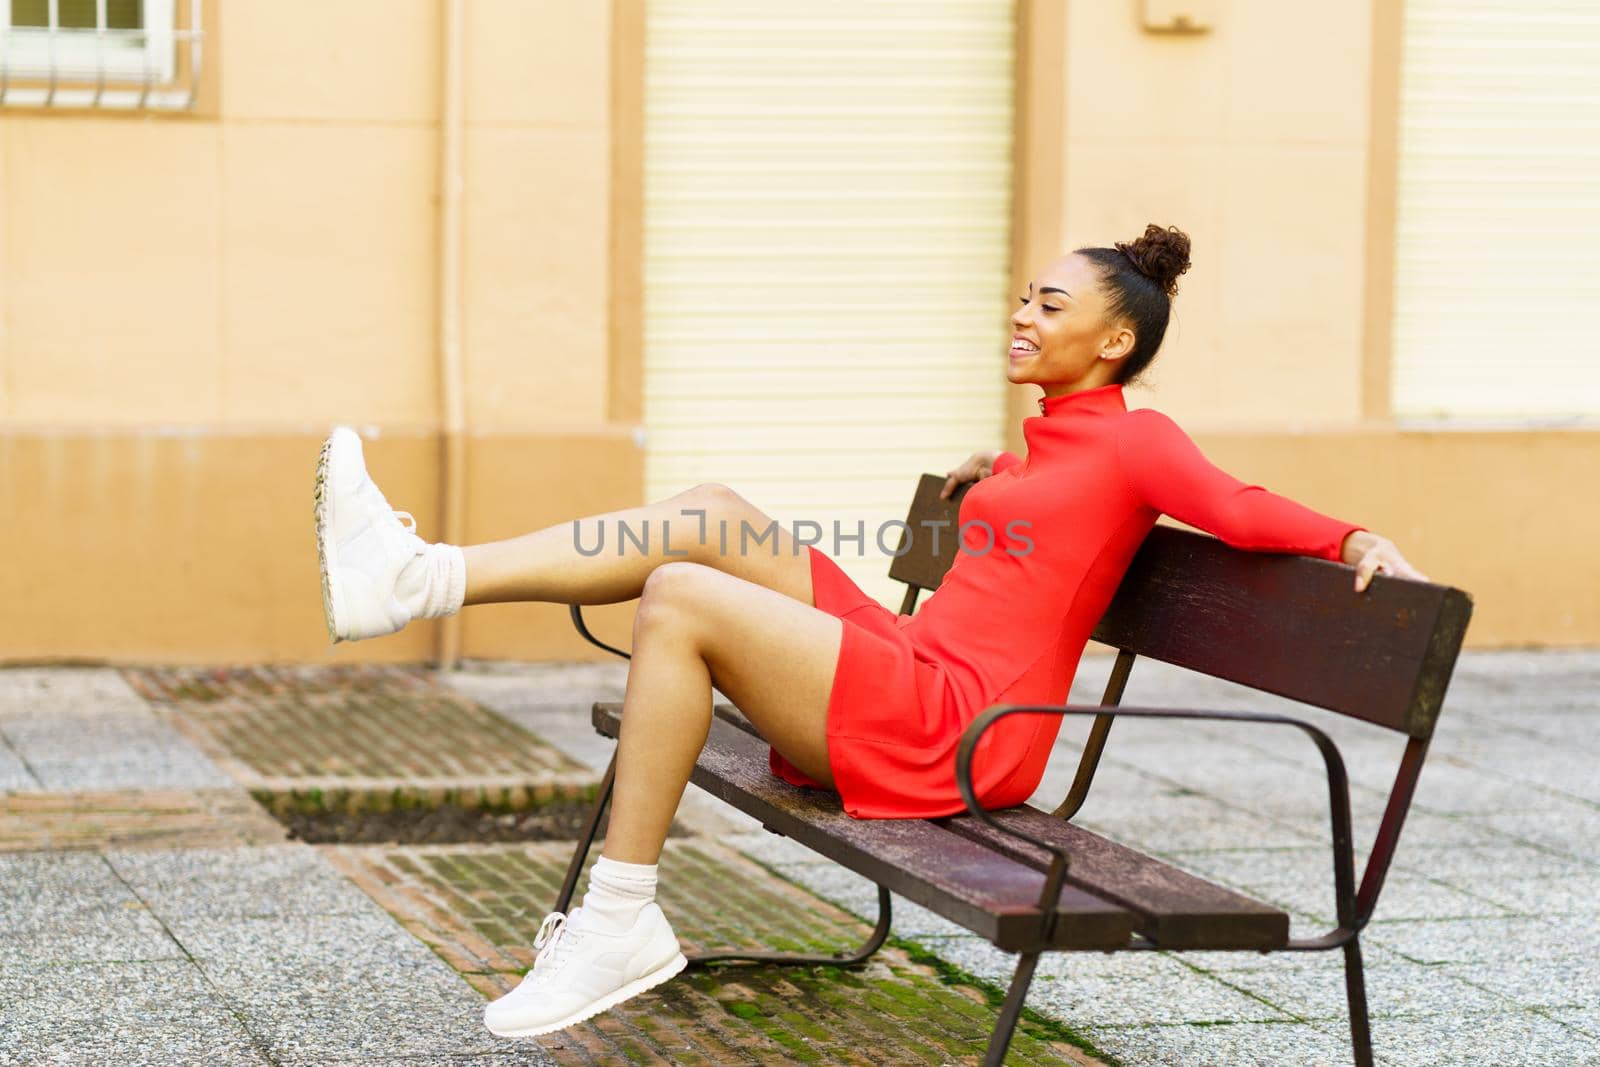 Happy mixed woman, moving her legs in joy, sitting on a bench in the street. by javiindy